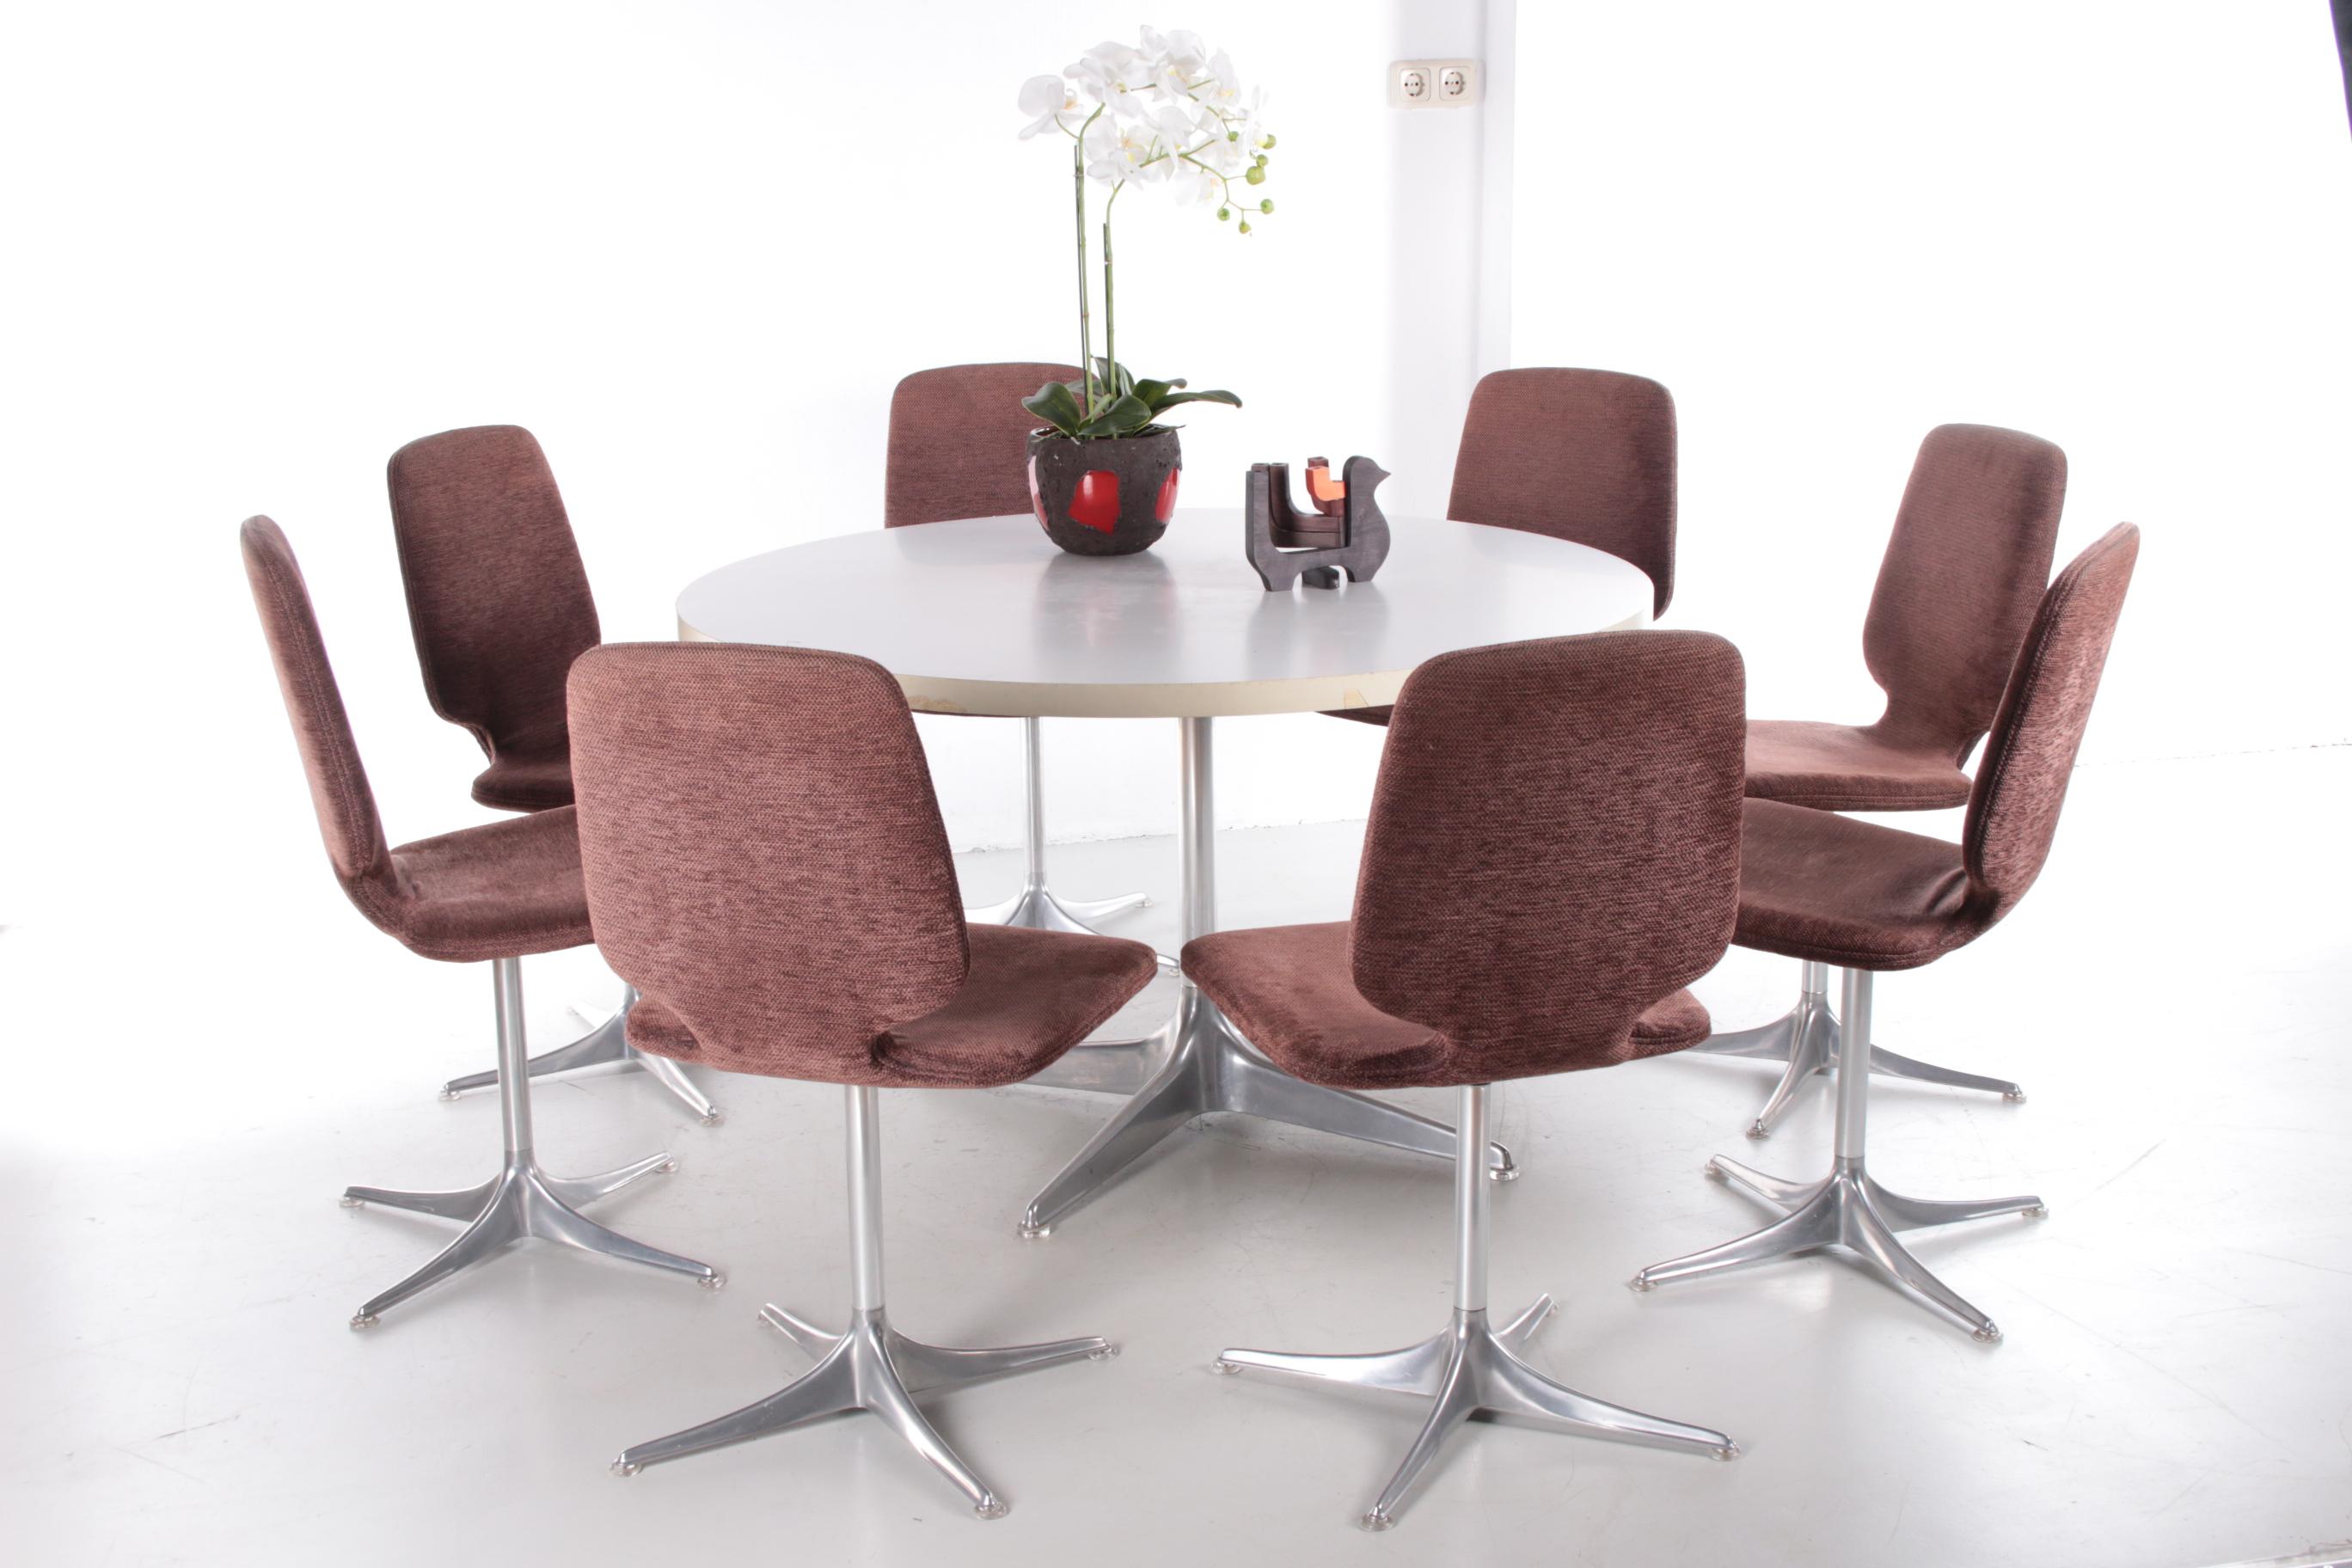 Set of 8 chairs with table by Horst Bruning Chair Model Sedia for cor.


Dining table group model Sedia,

German design by Horst Brüning for COR.

Designed in 1966.

Seats upholstered in brown velvet.

Polished aluminum base. Dining table